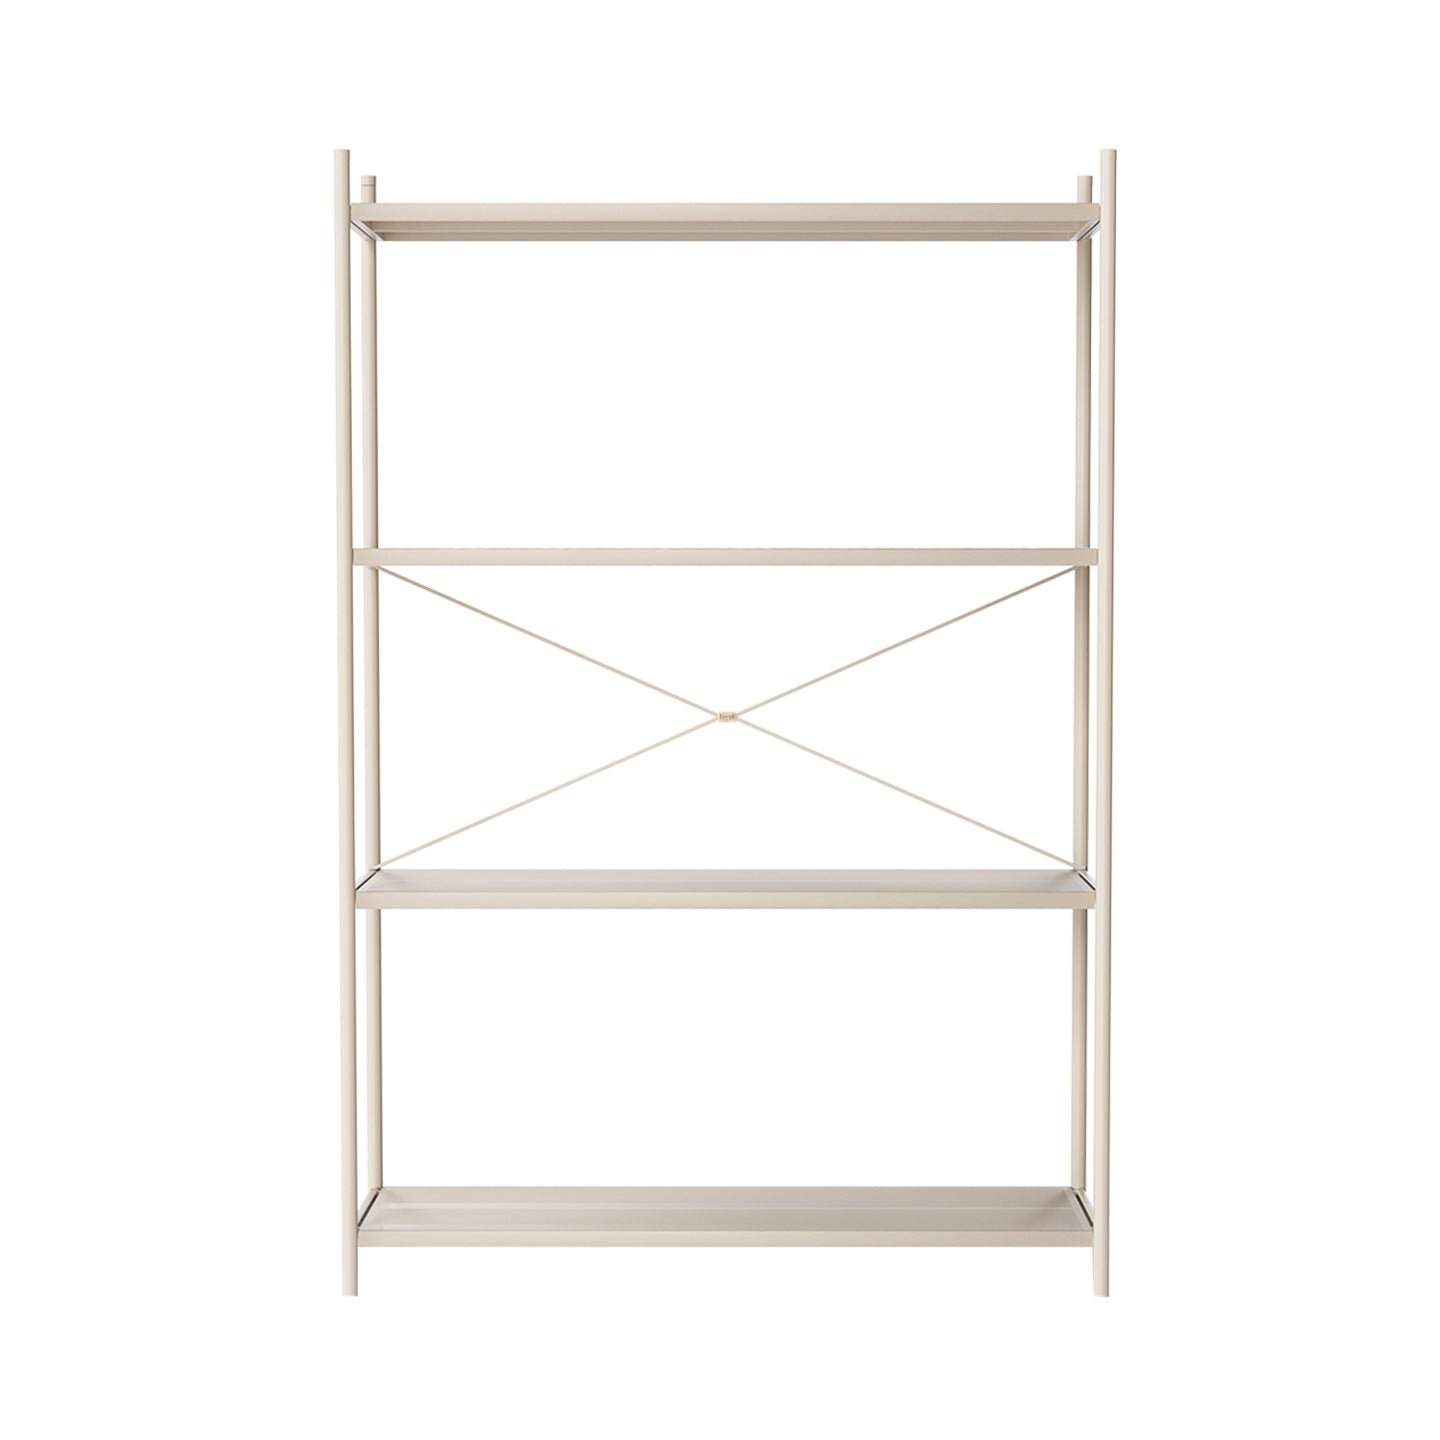 Punctual Shelving System: Configuration 3 + Cashmere (Perforated) + Cashmere